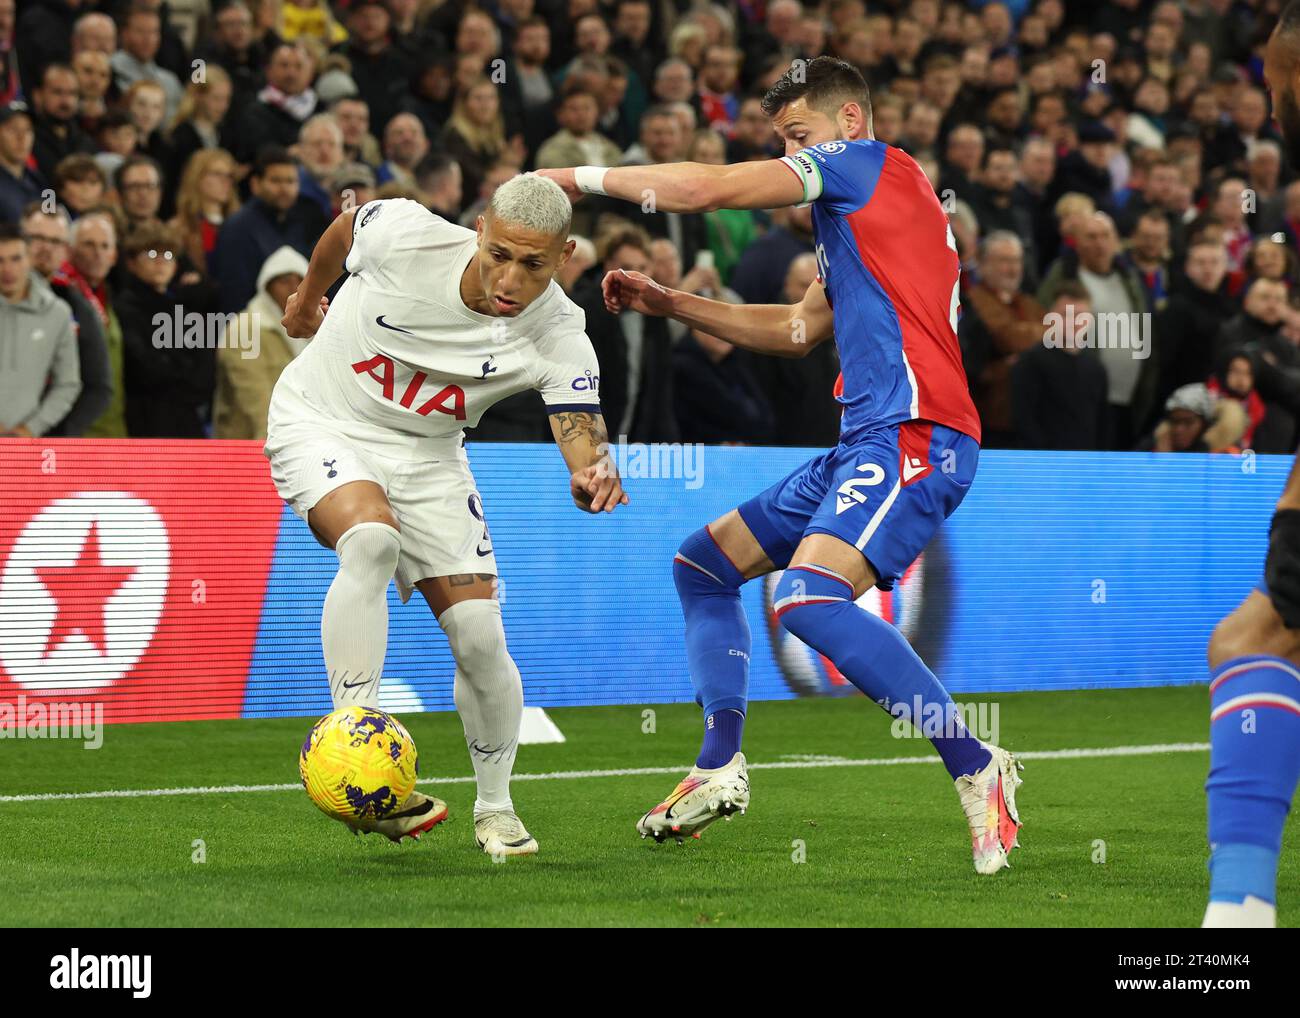 Tottenham hotspur v crystal palace hi-res stock photography and images -  Page 10 - Alamy